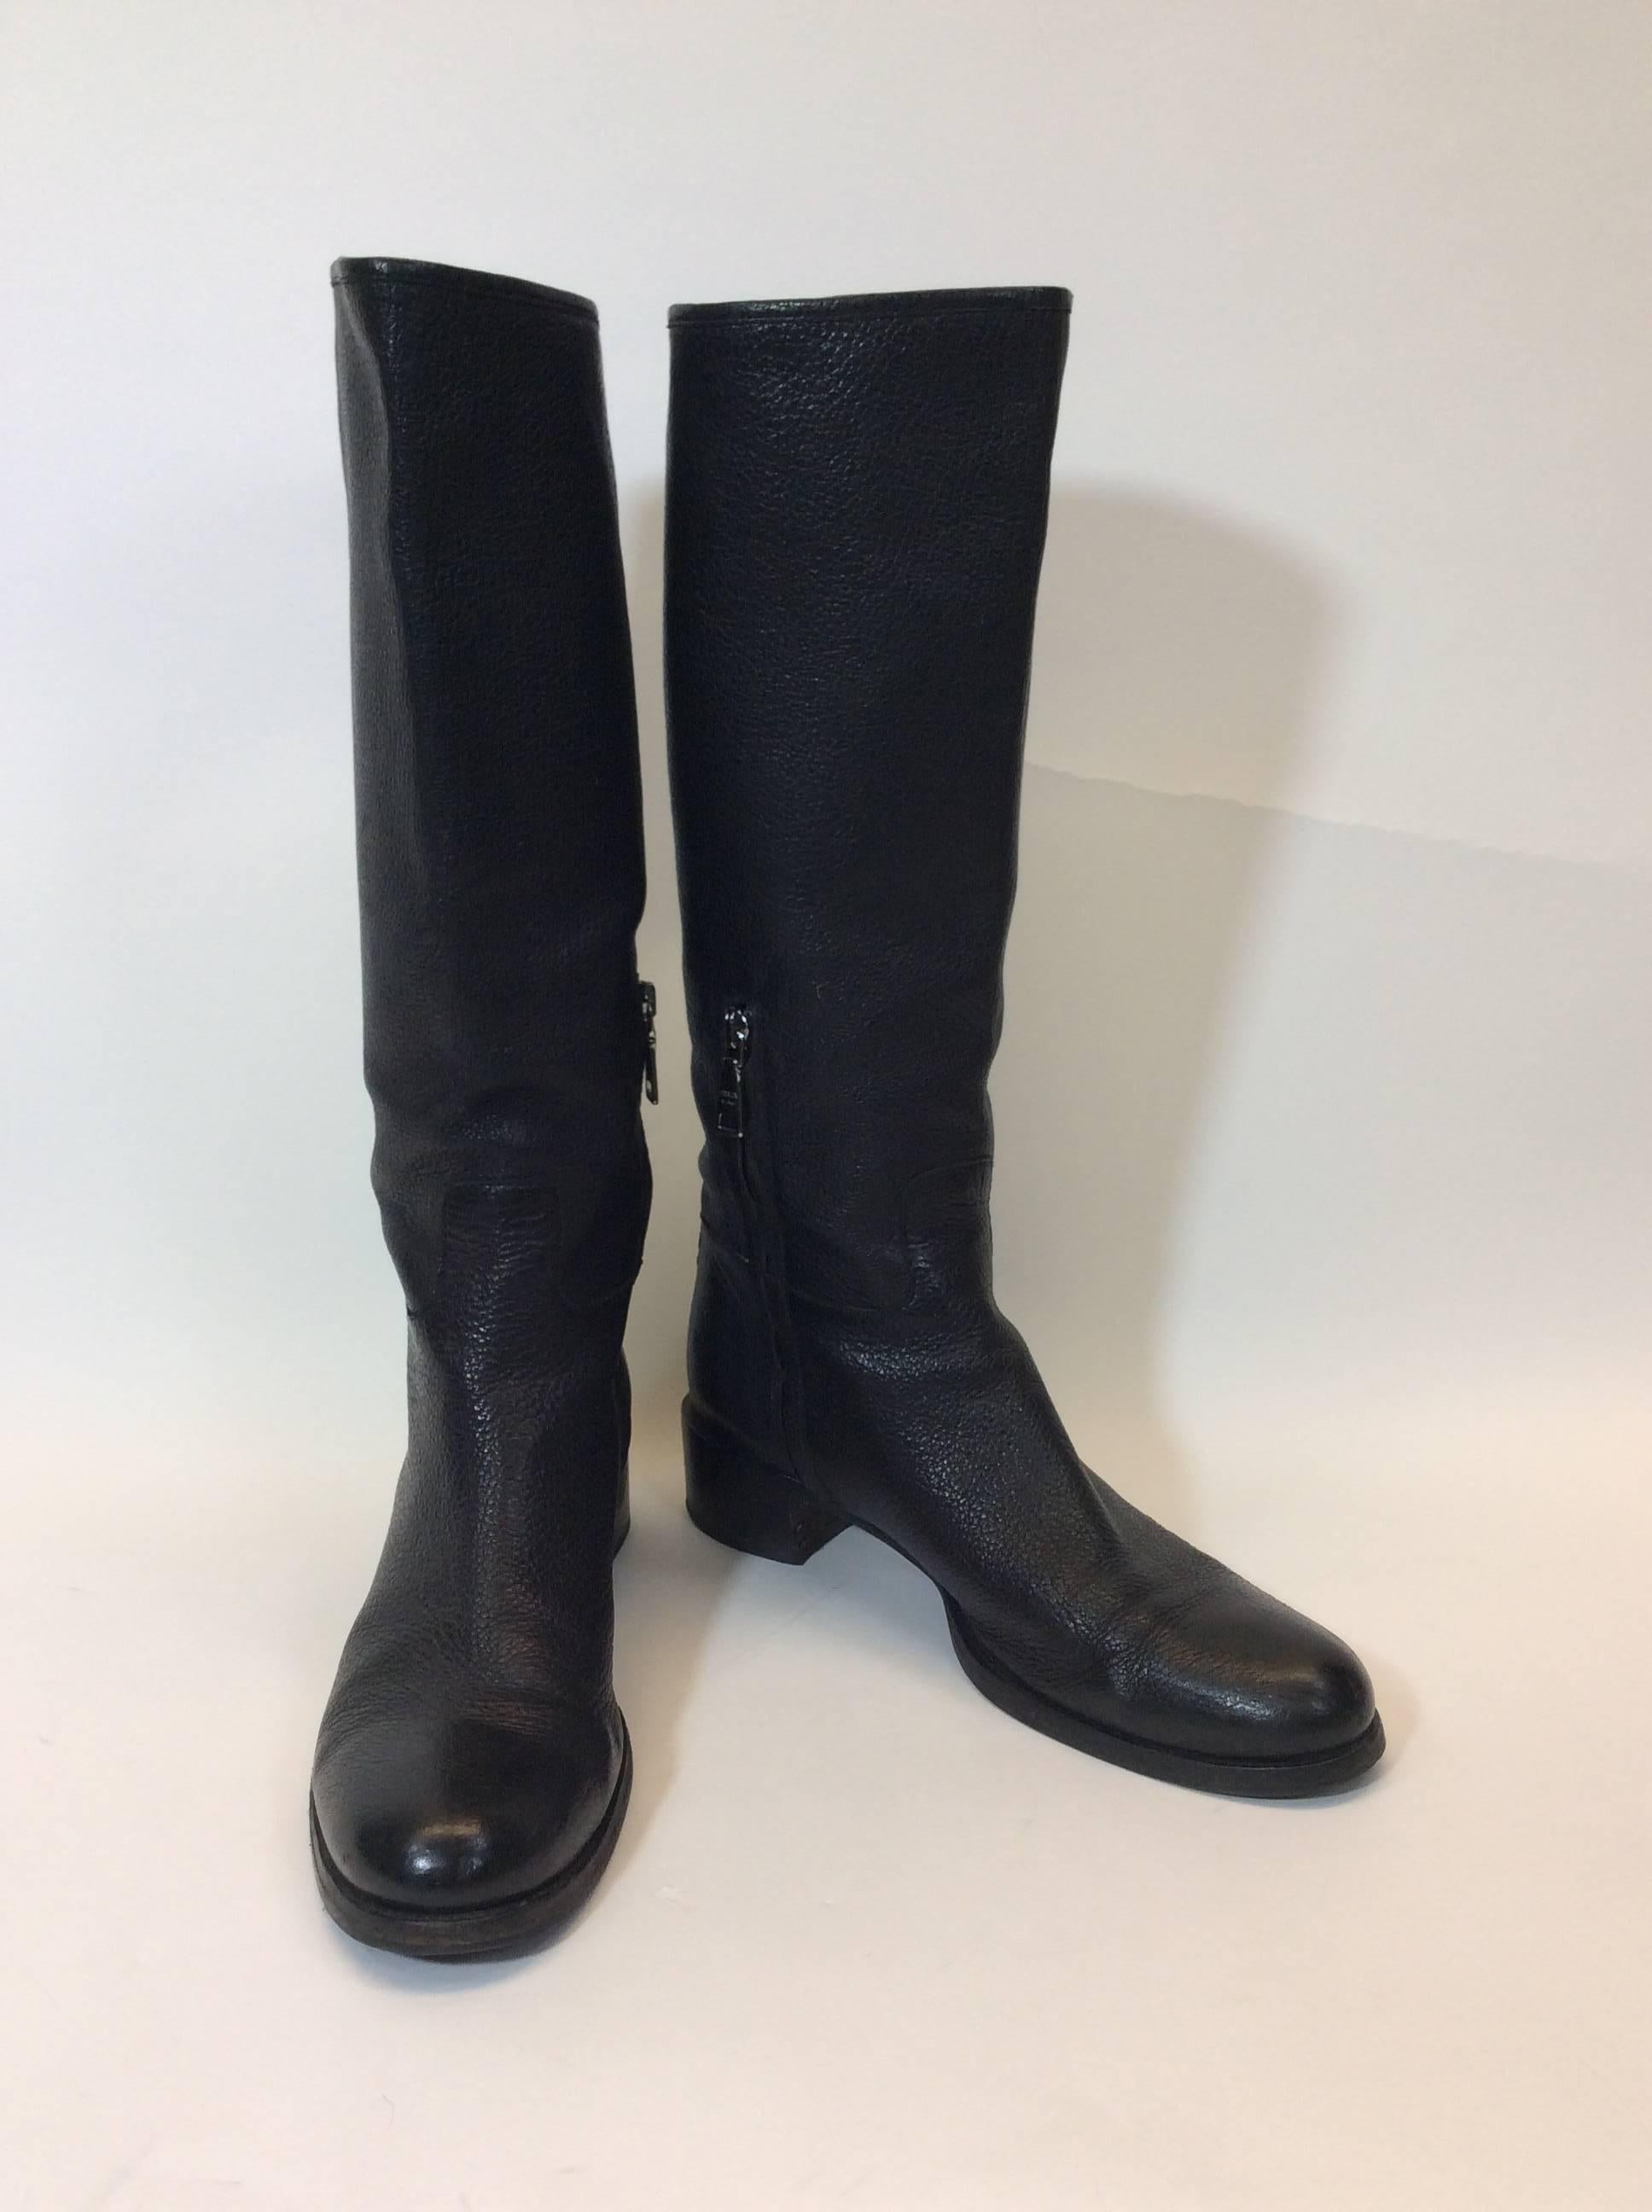 Black Leather Knee High Boots
Small Silvertone Zipper on inner Ankle
1.5